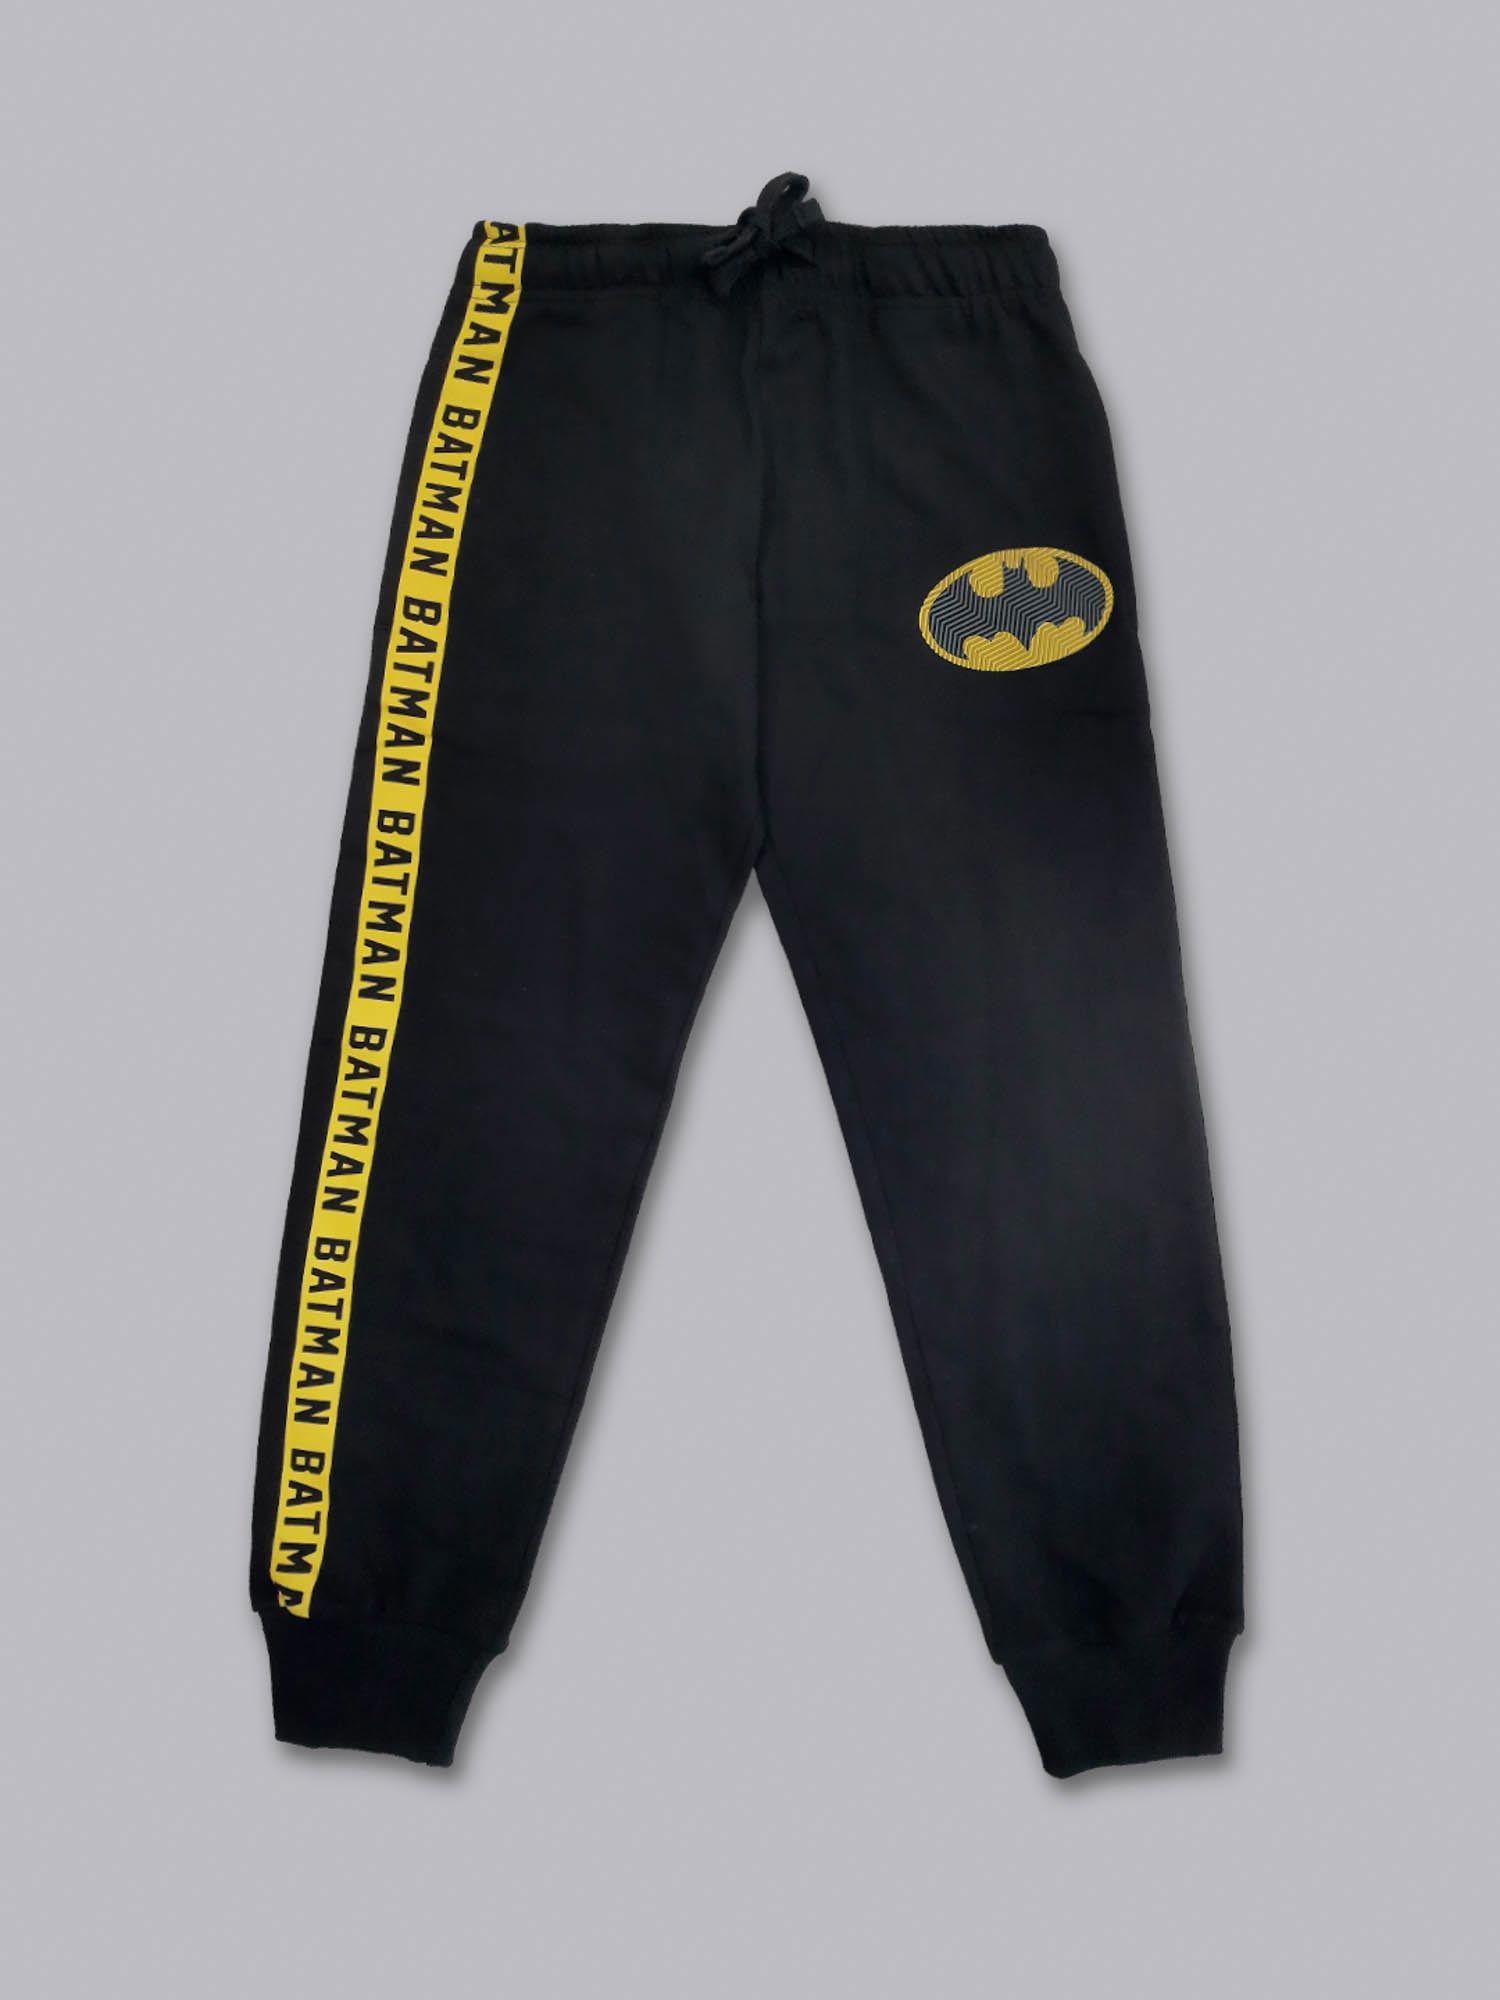 batman featured joggers for boys